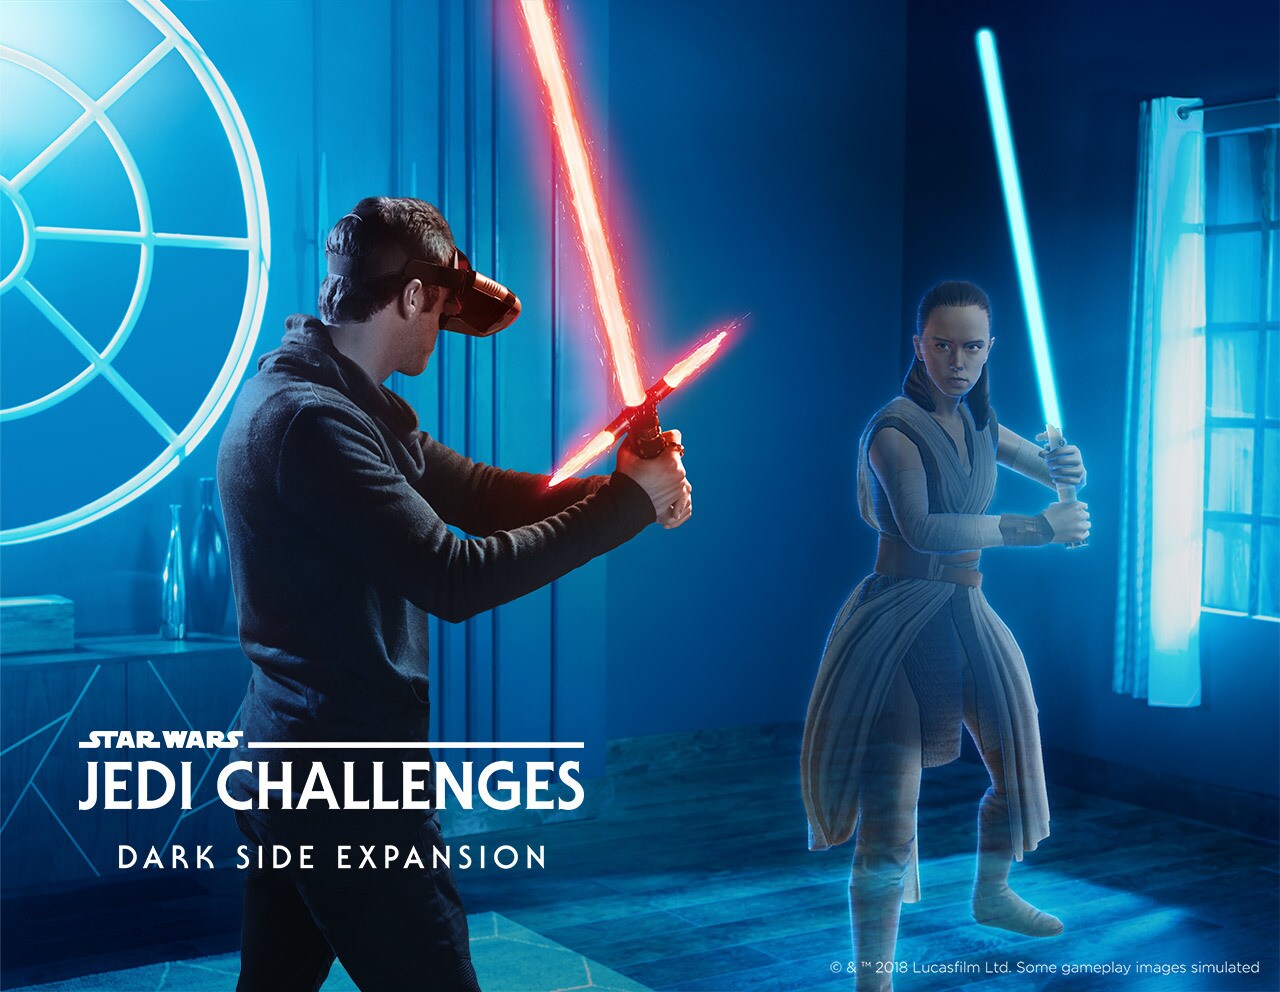 A player in VR gear confronts a ghostly Rey in the Dark Side Expansion of Star Wars: Jedi Challenges.